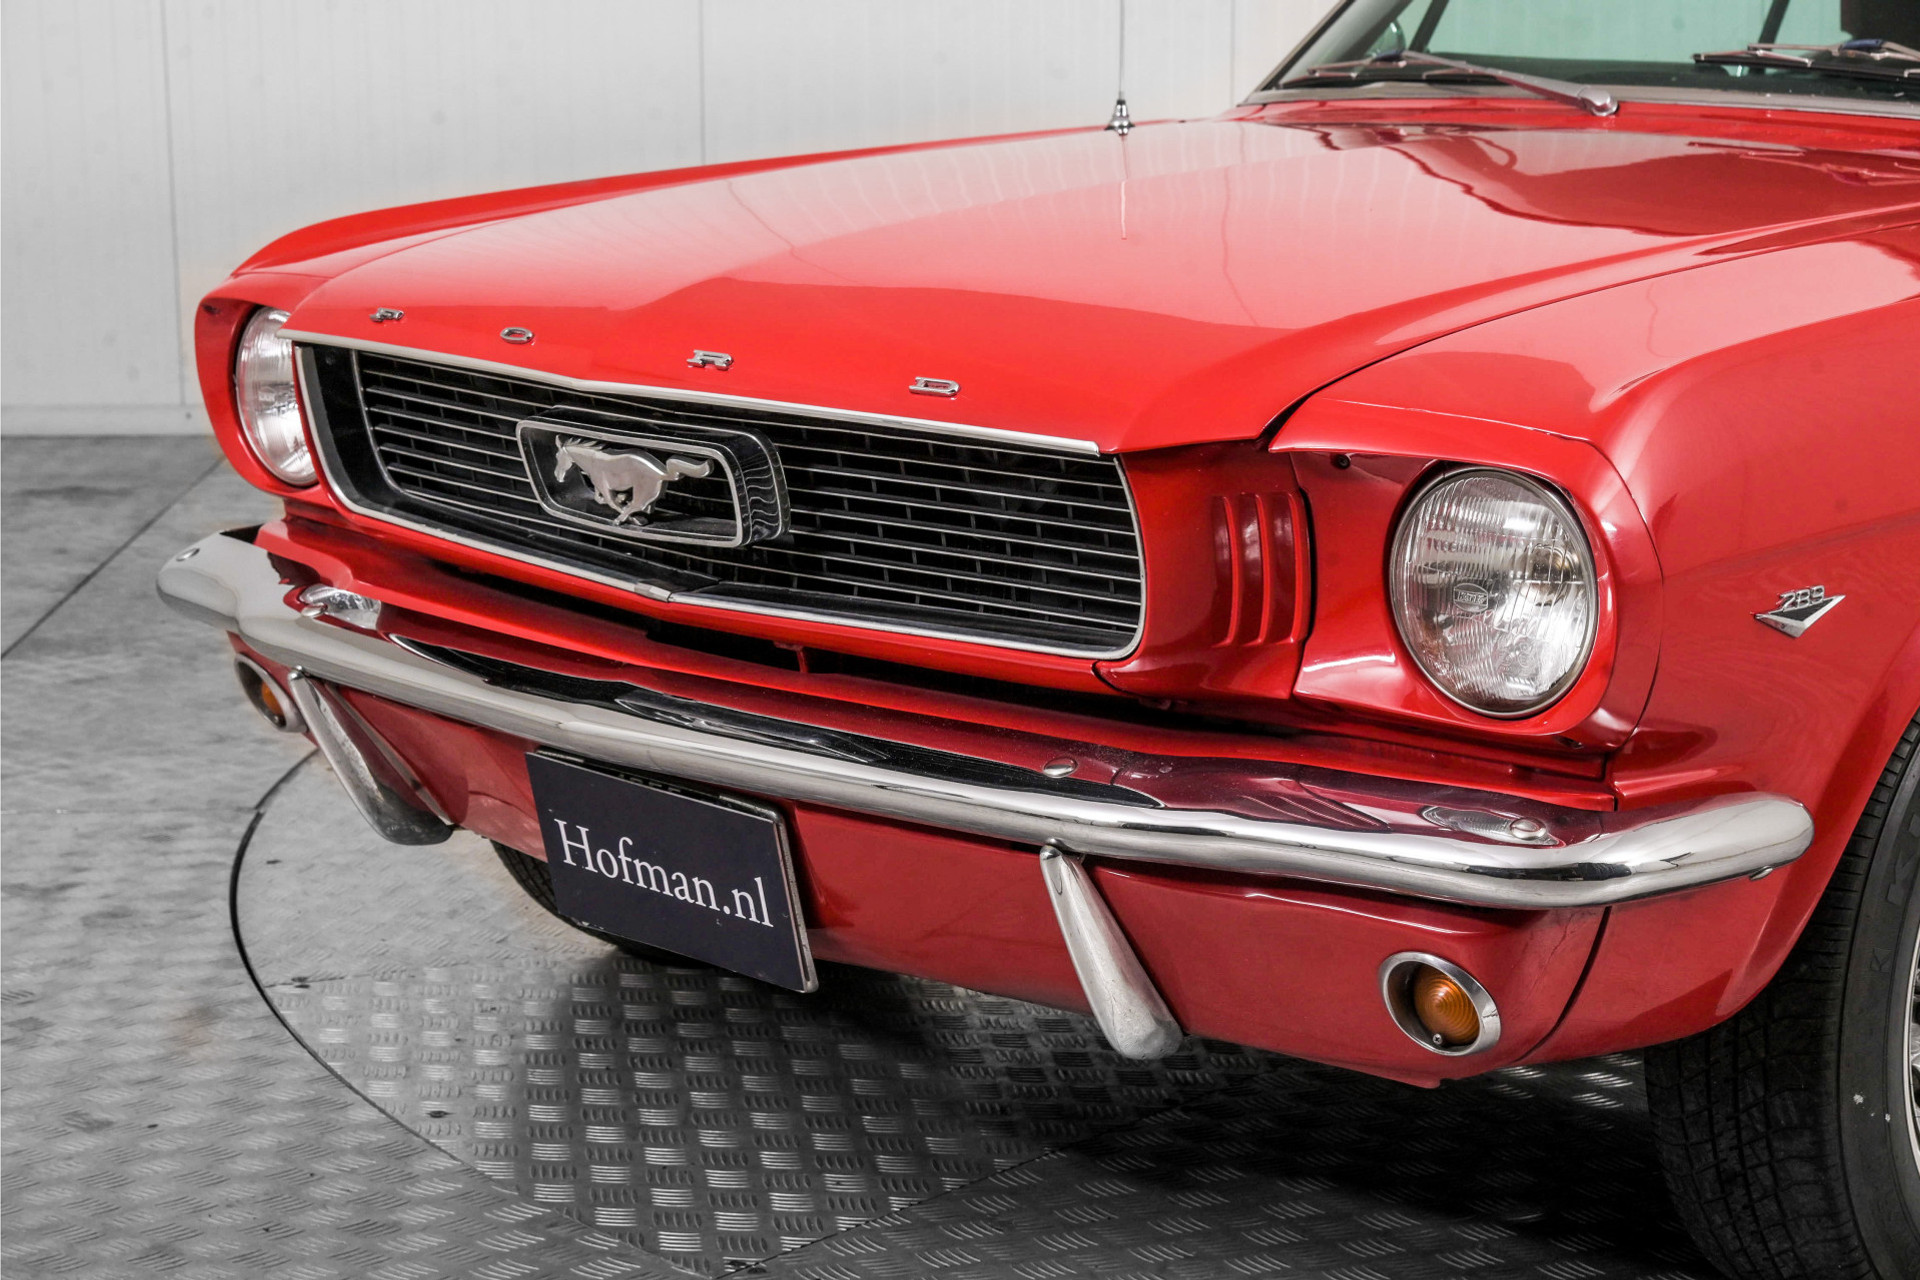 Ford Mustang 289 V8 automatic Foto 20